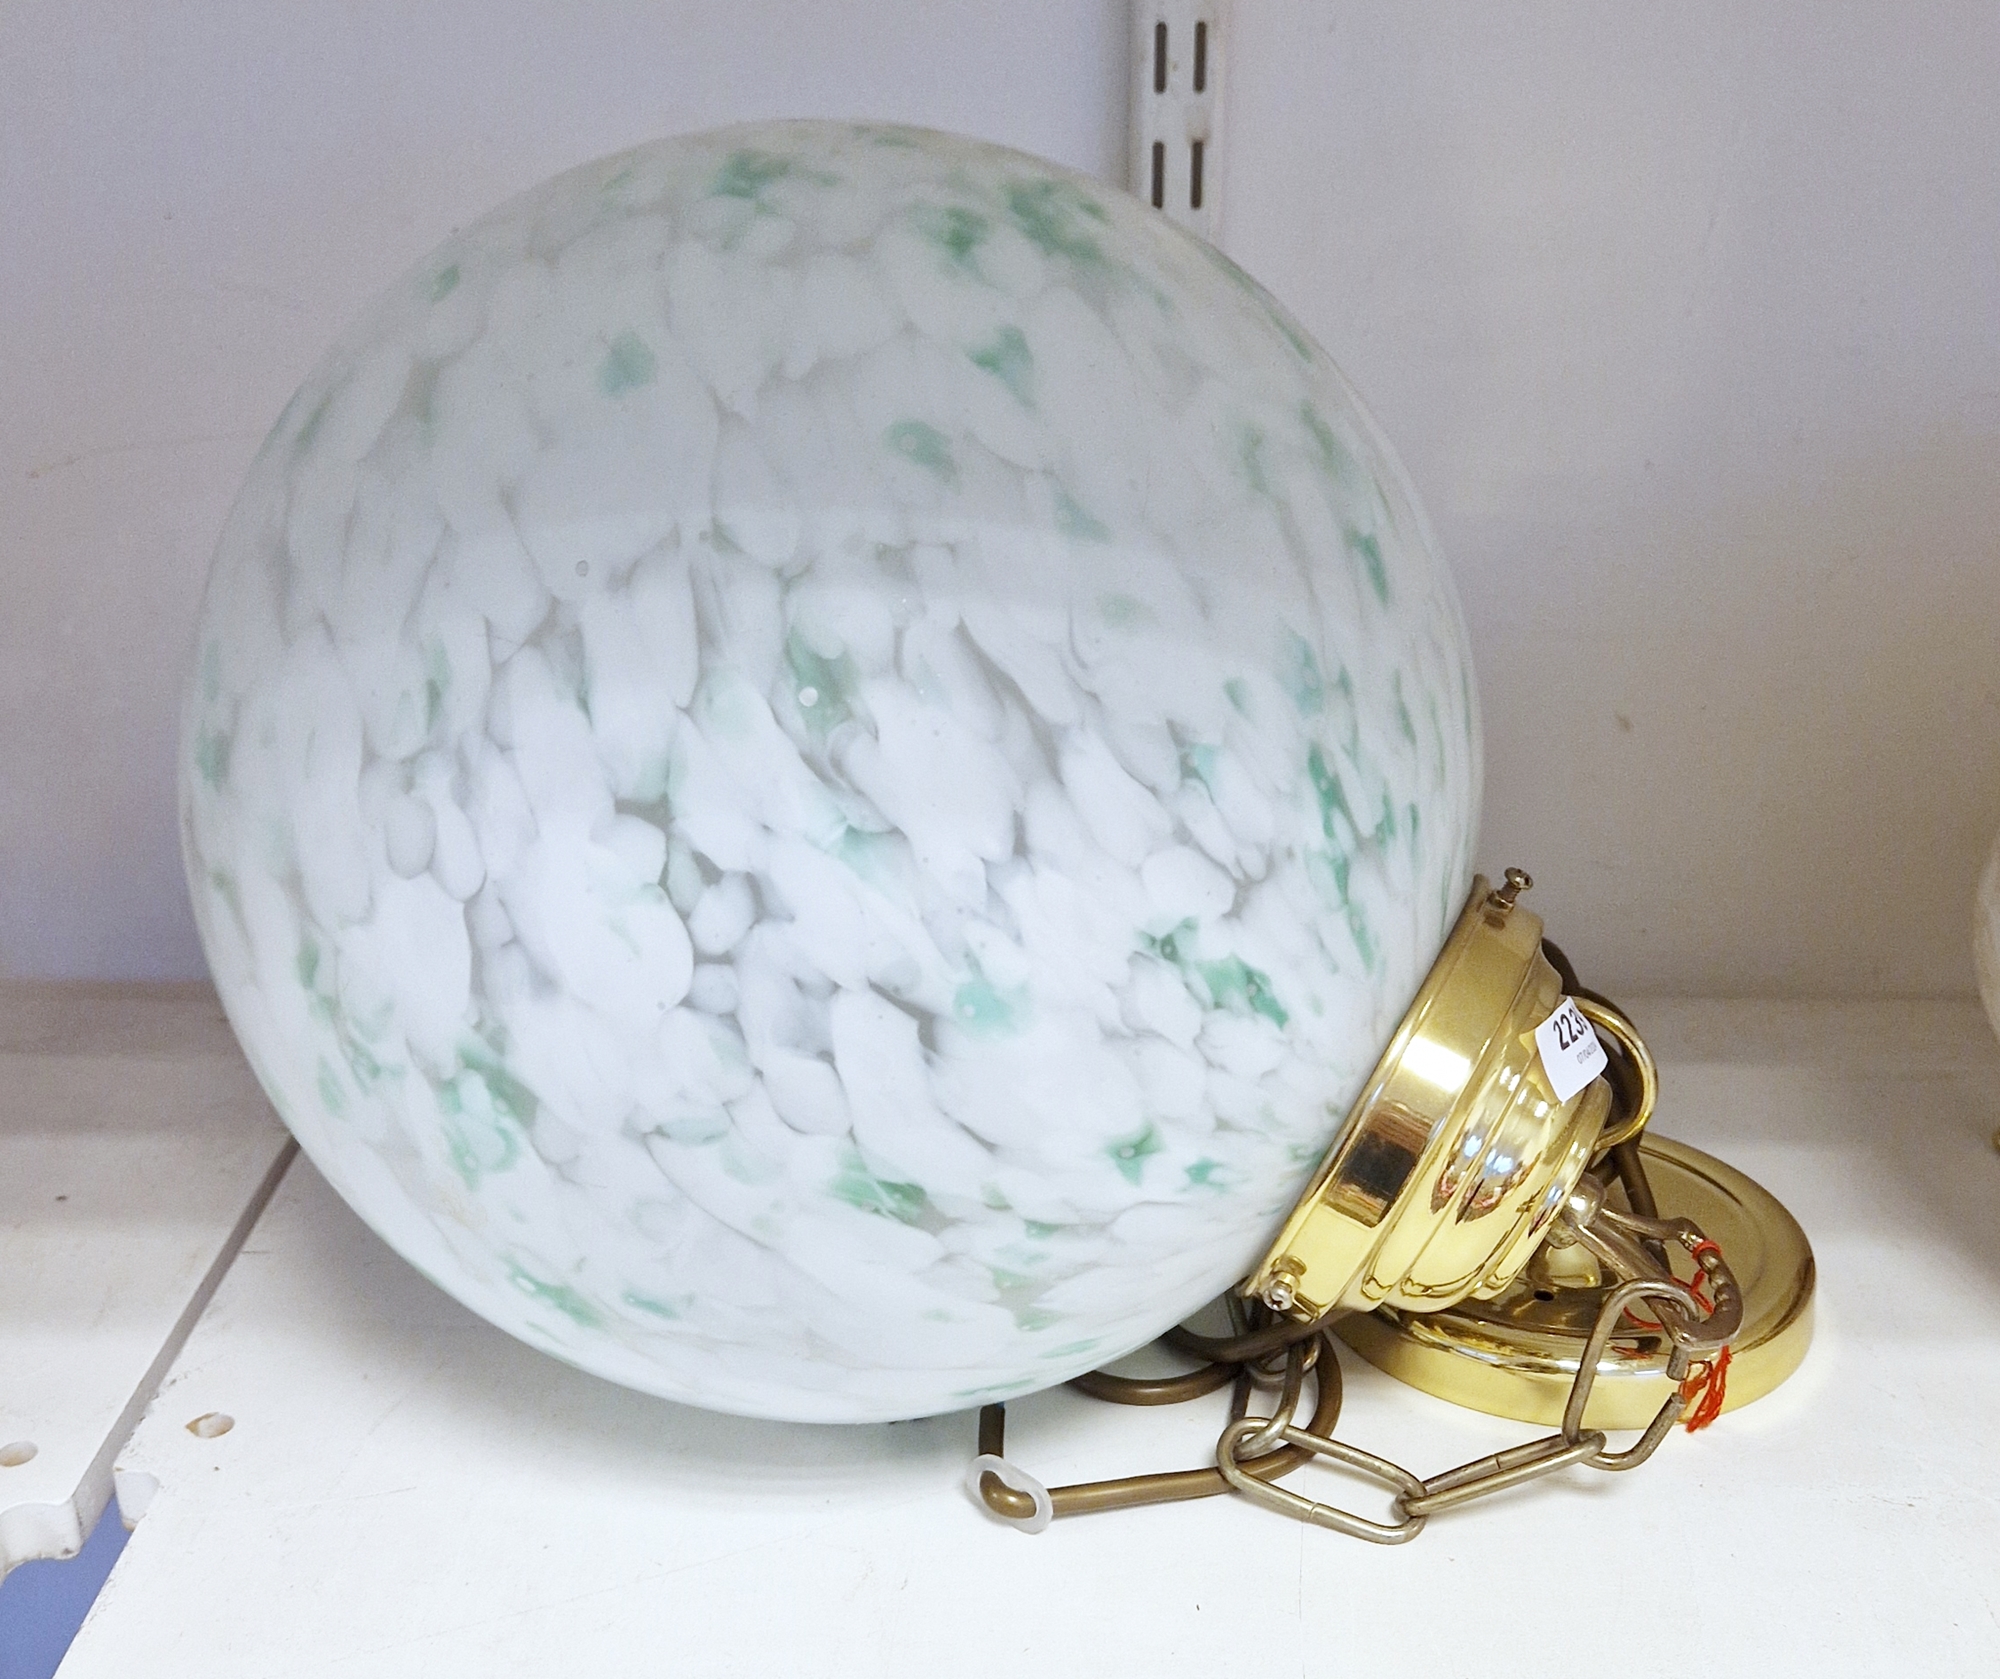 Contemporary large opaque glass globe-shaped pendant light with gilt-metal fittings, in the Art Deco